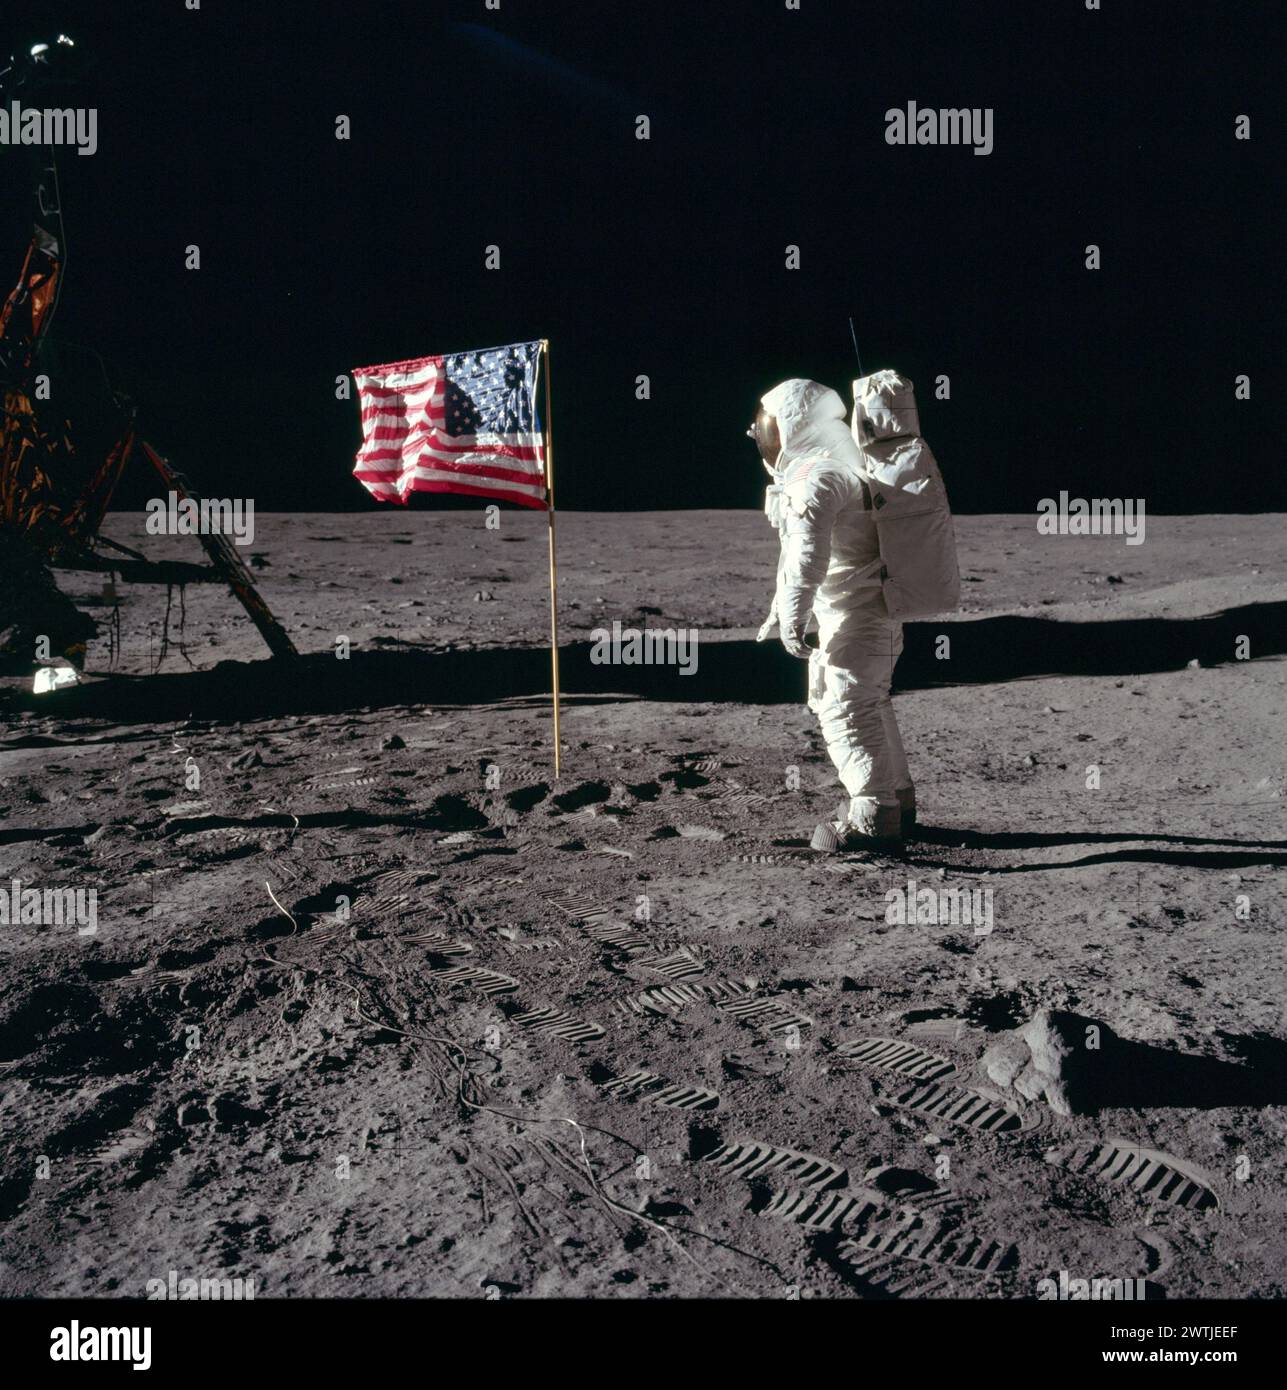 The United States reached the Moon in 1969. / Neil A. Armstrong - Apollo 11  Buzz Aldrin salutes the U.S flag on the Moon (mission time: 110:10:33). His fingertips are visible on the far side of his faceplate. Note the well-defined footprints in the foregr Stock Photo